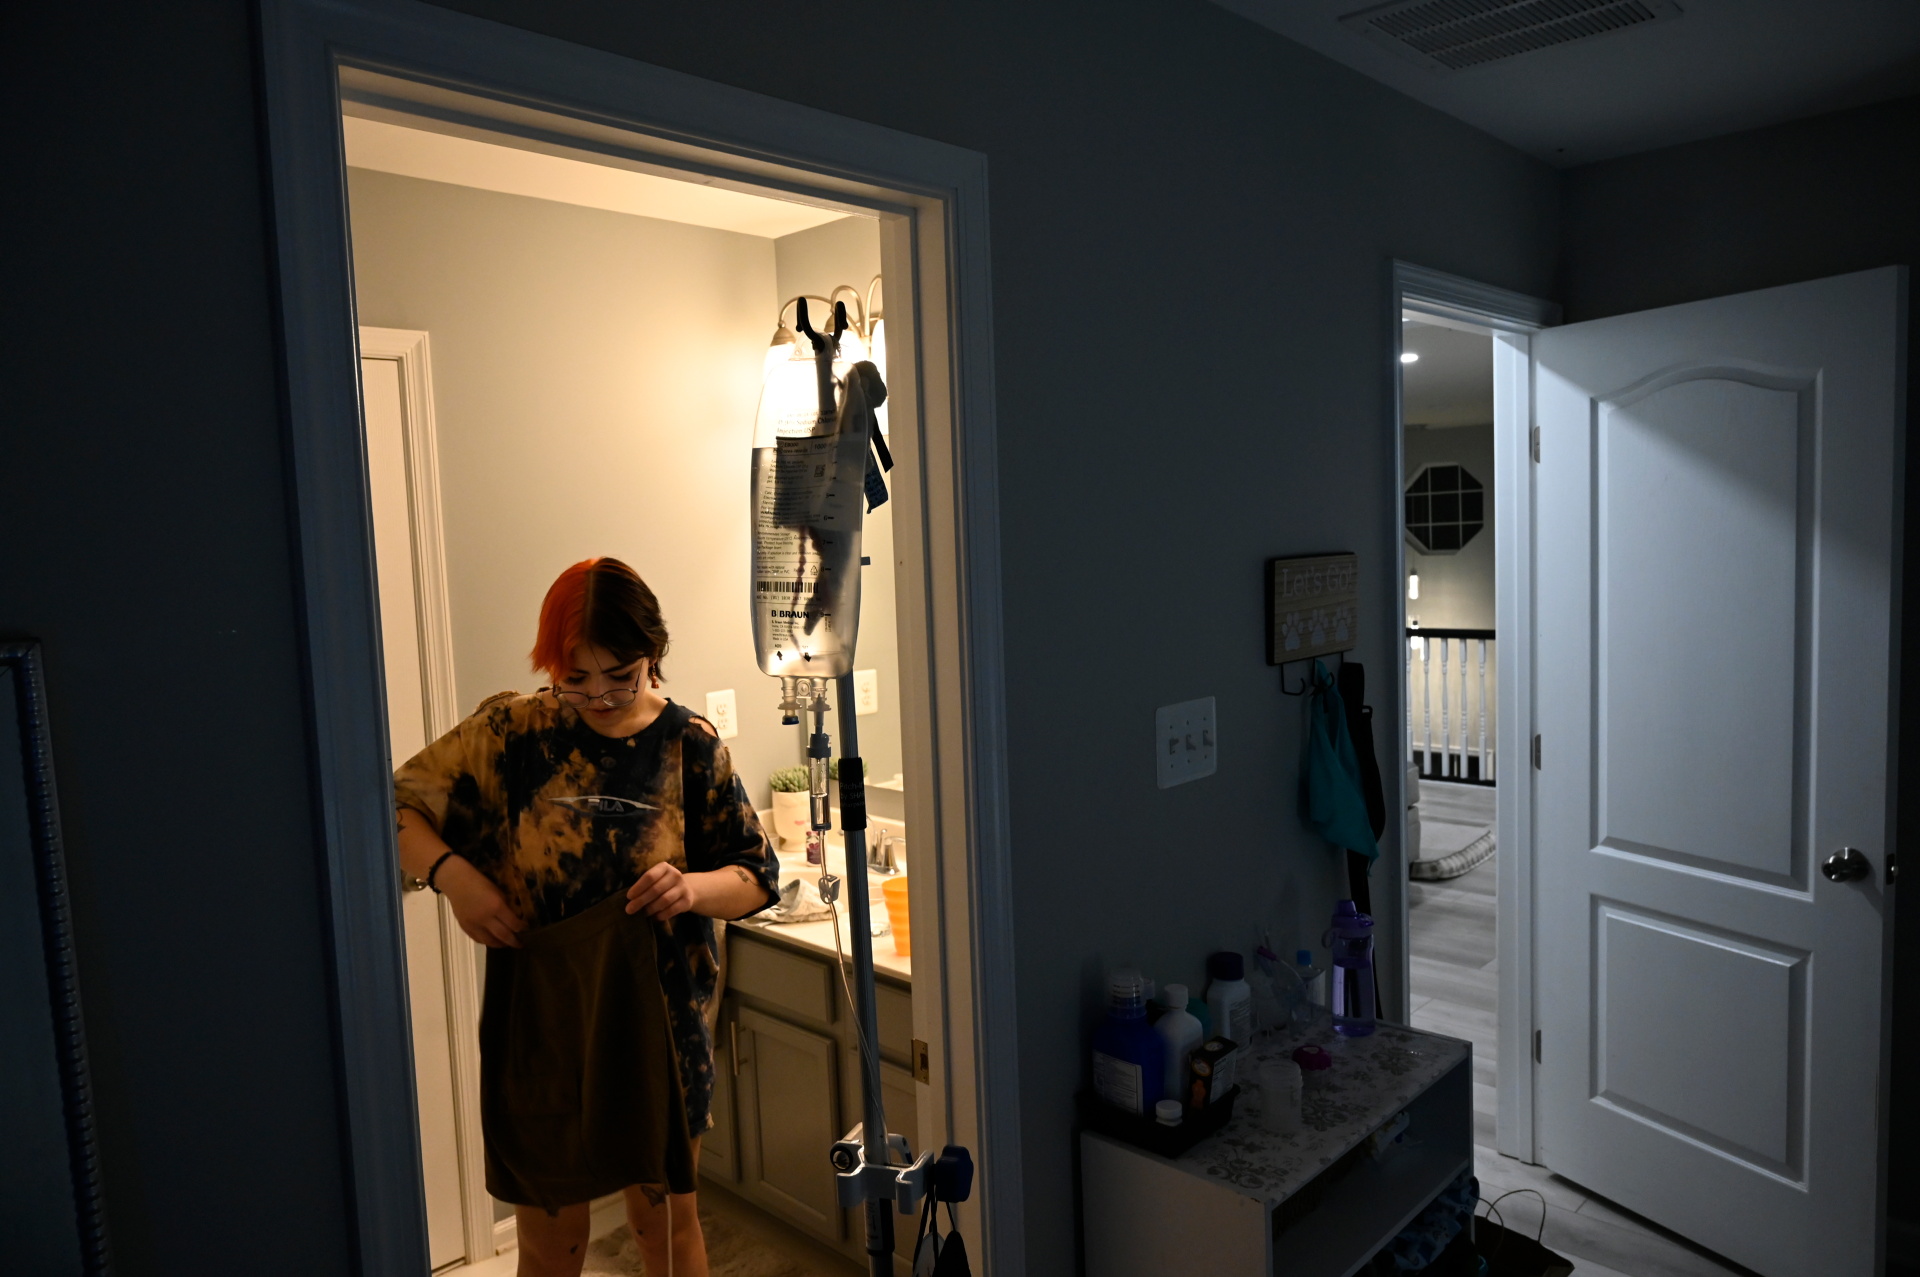 Kelble tidies up their room while they carry their IV bag, at their previous house in Easton, Maryland, May 13, 2022. Photo: Reuters